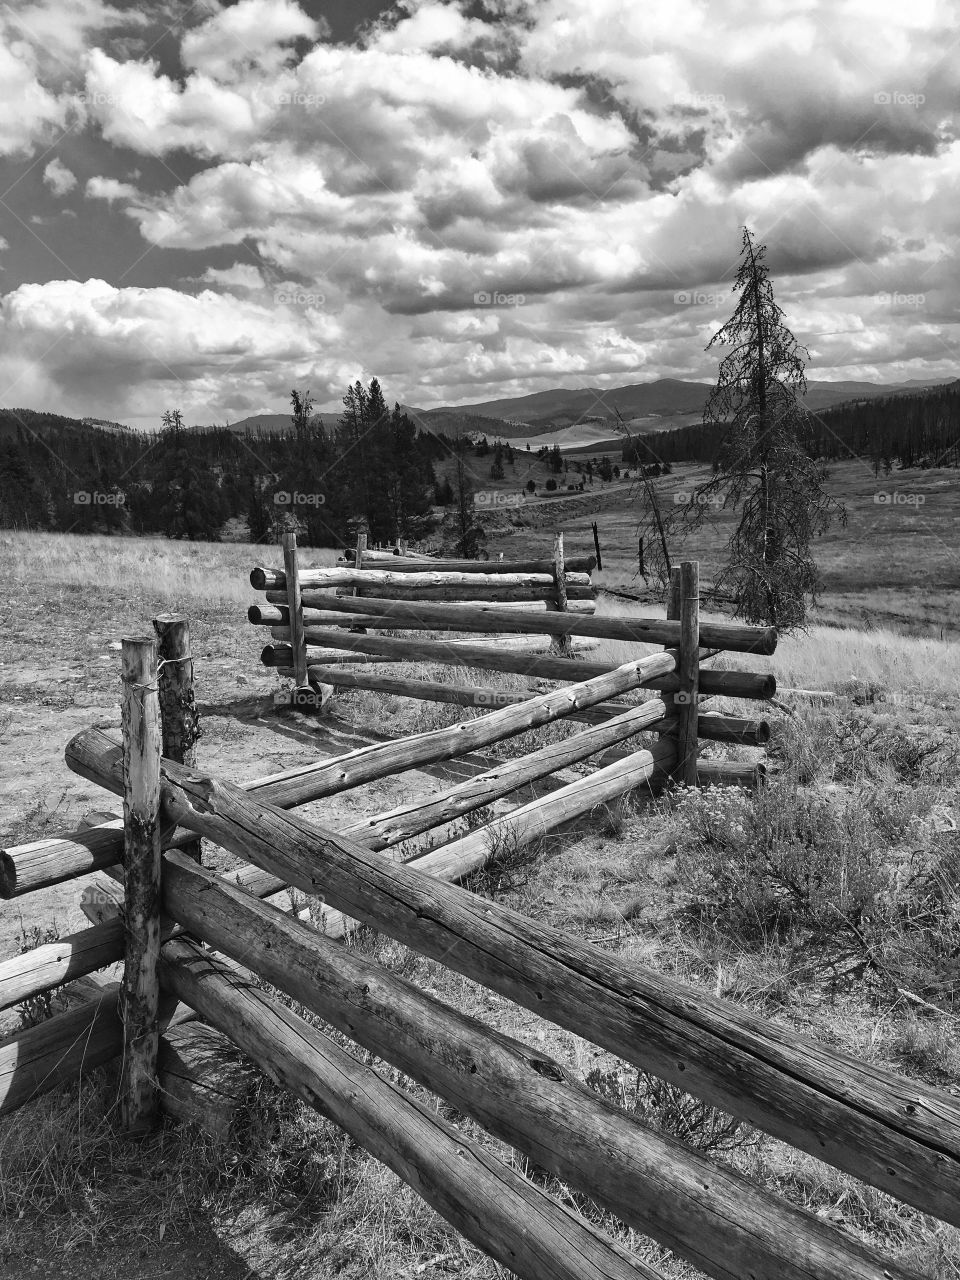 Mountain Wooden Fence in Monochrome 